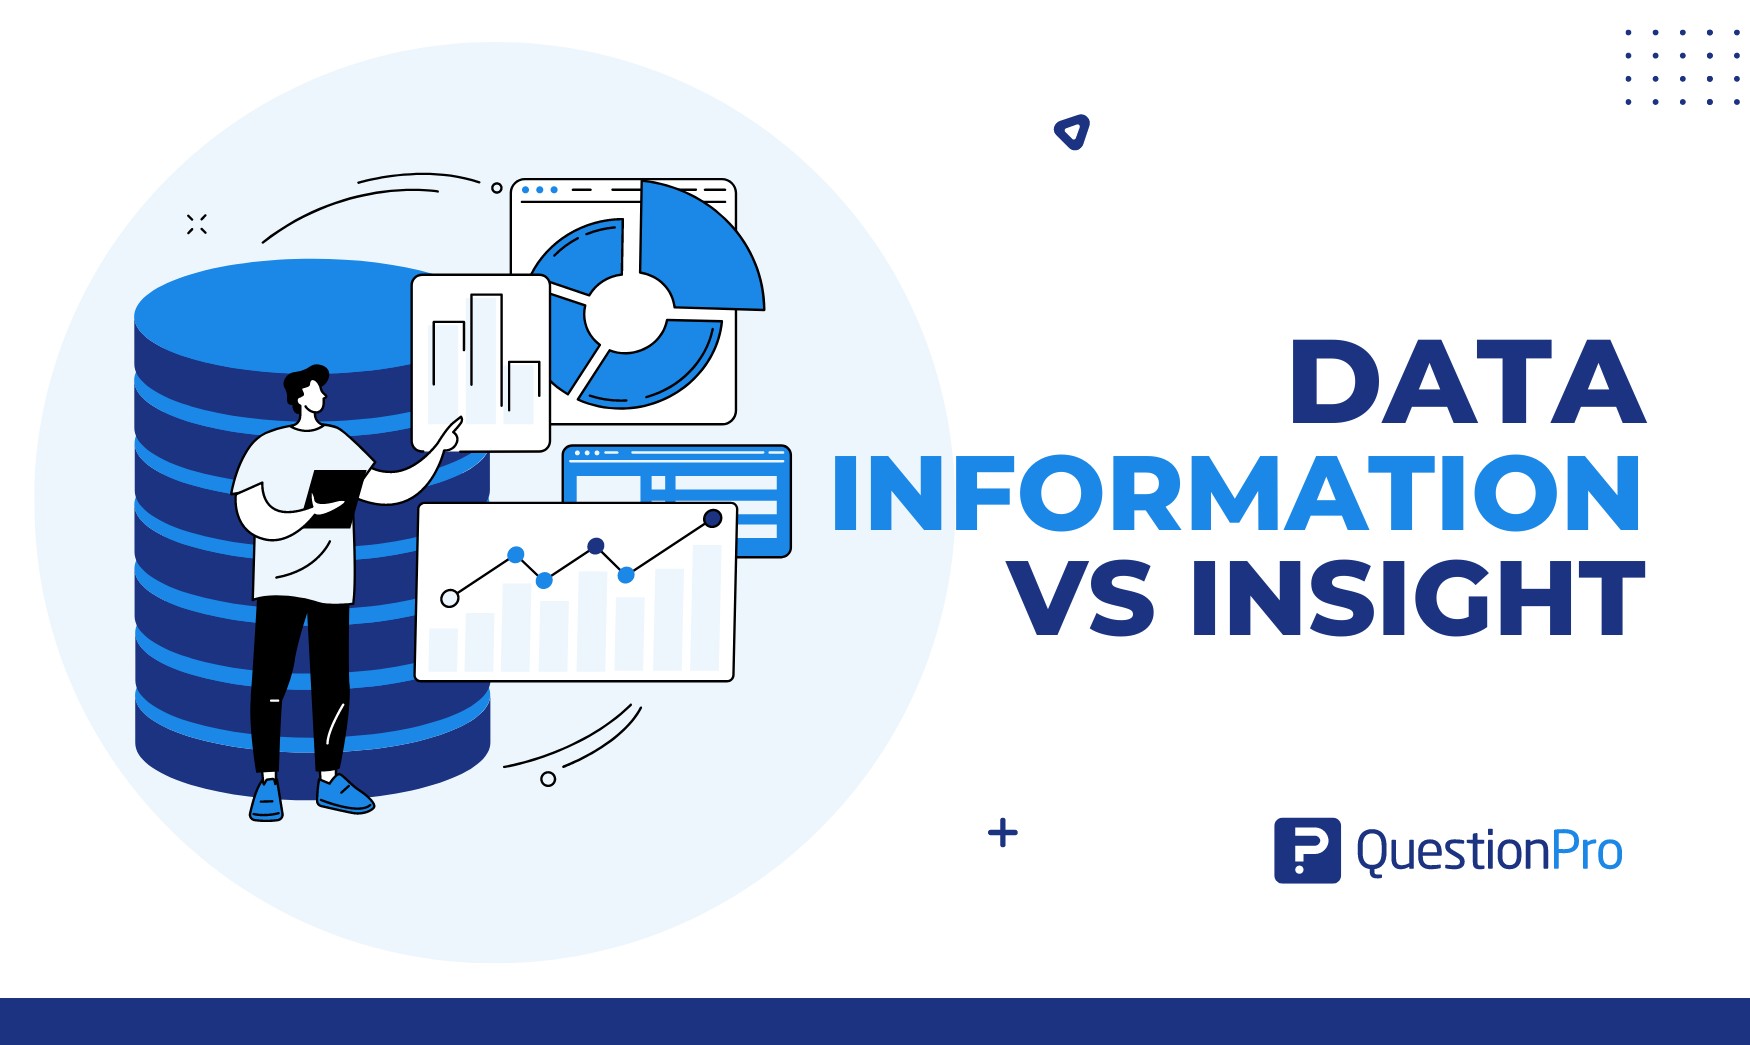 Data Information vs Insight: Essential differences